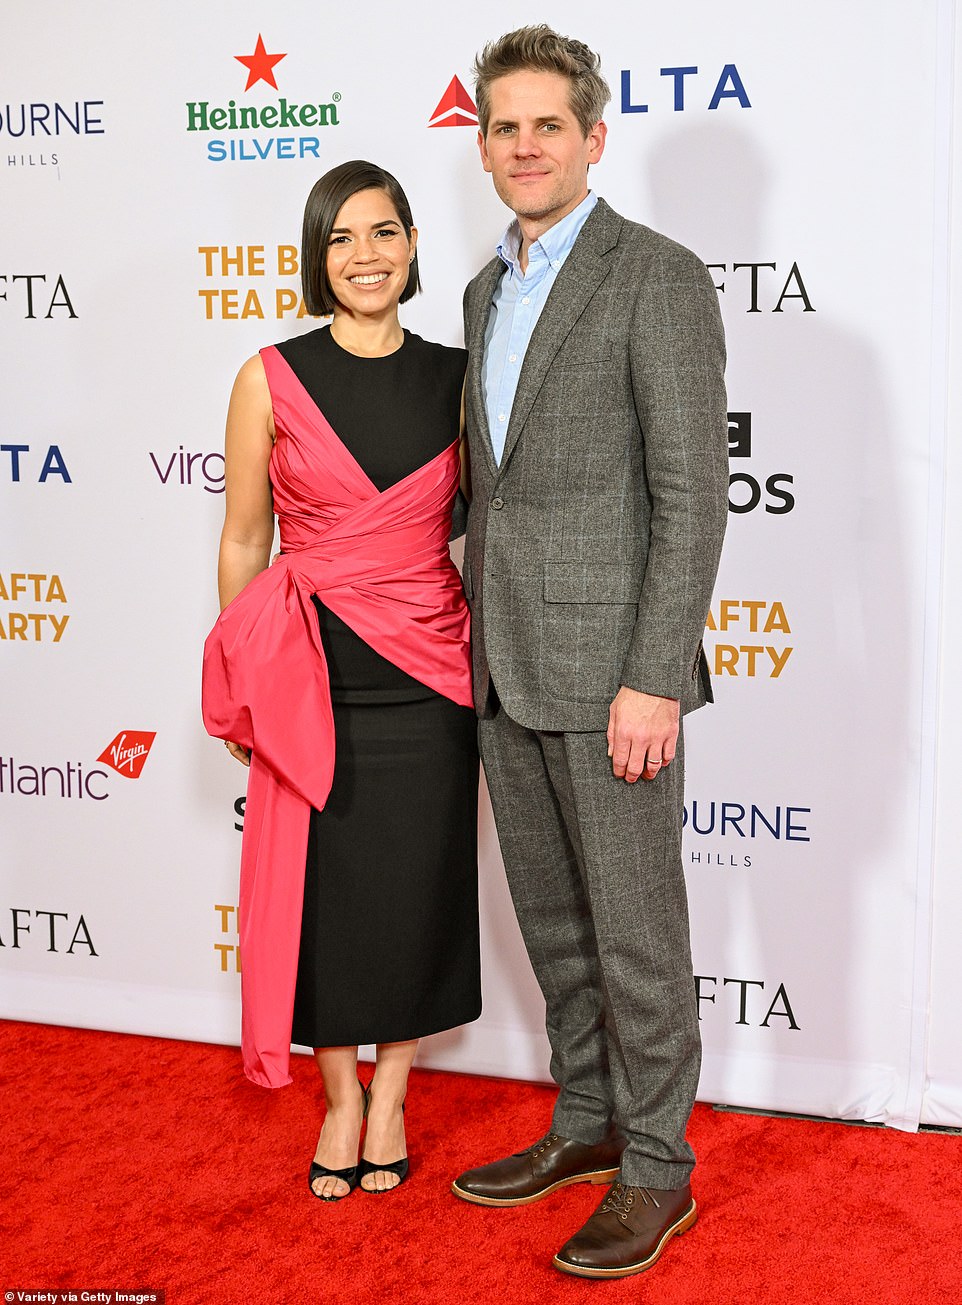 The Ugly Betty alum was accompanied by her husband, Ryan Piers, as the couple happily posed for photos on the red carpet together